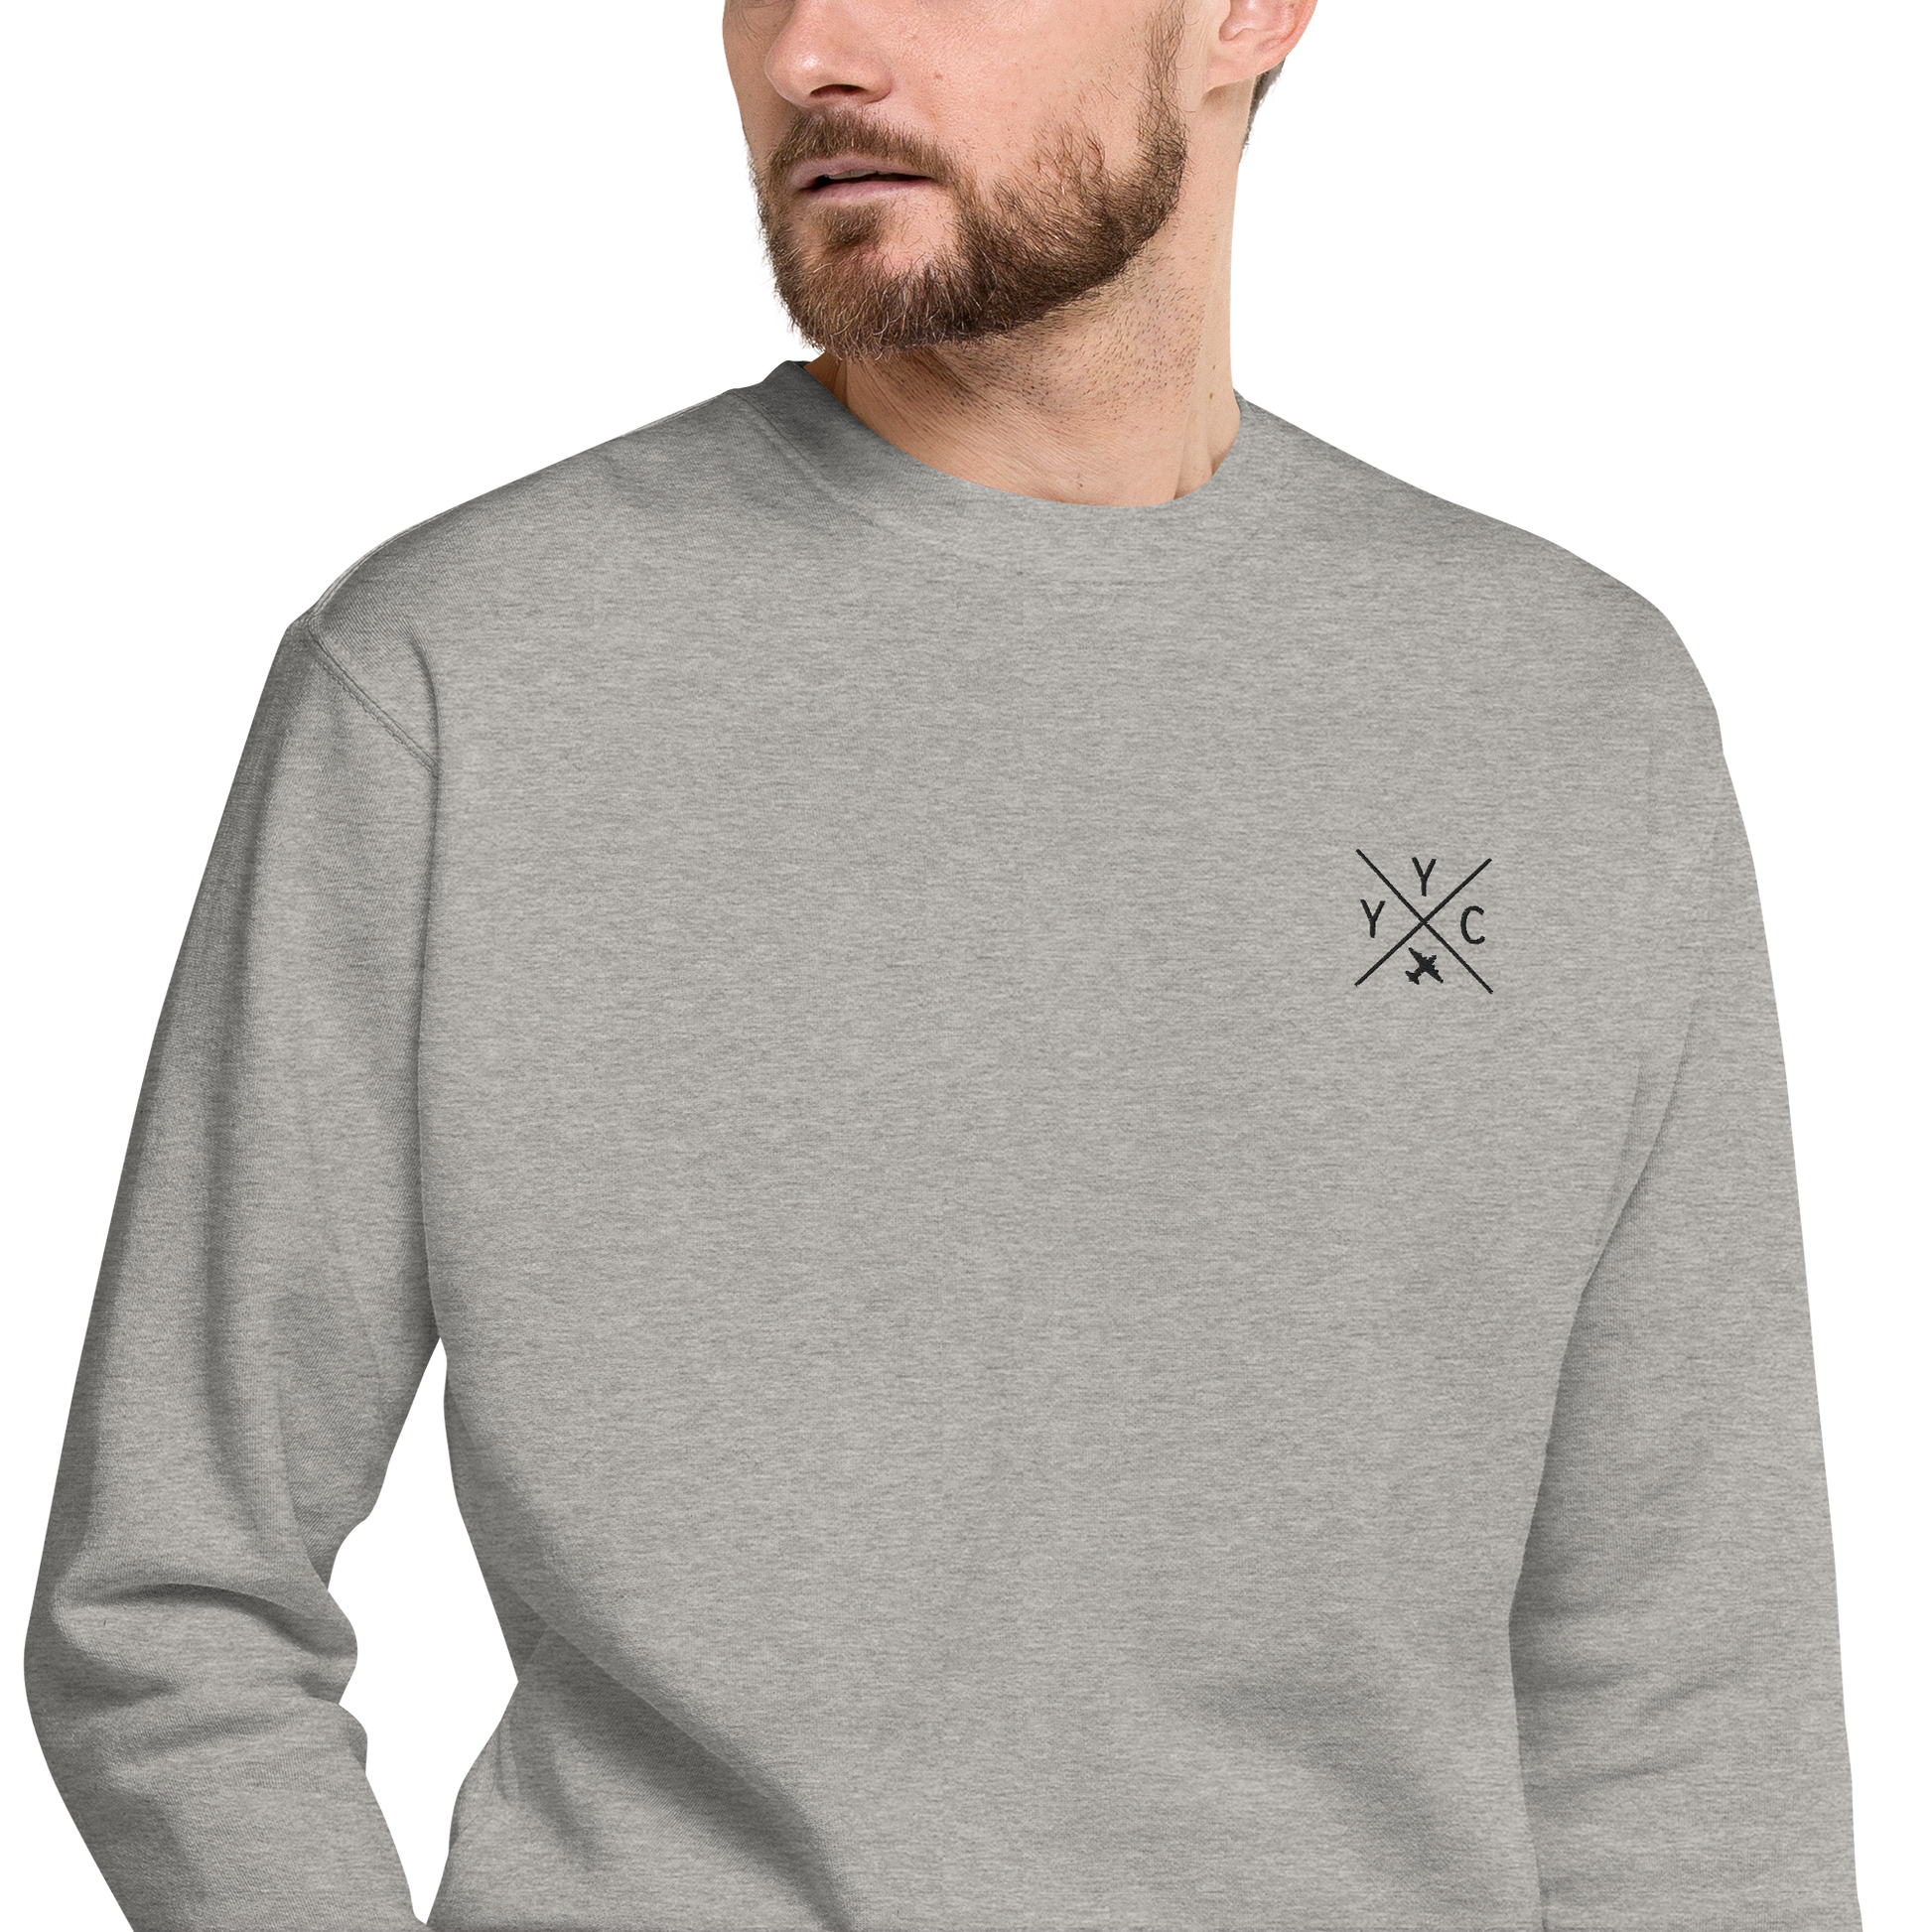 YHM Designs - YYC Calgary Premium Sweatshirt - Crossed-X Design with Airport Code and Vintage Propliner - Black Embroidery - Image 09